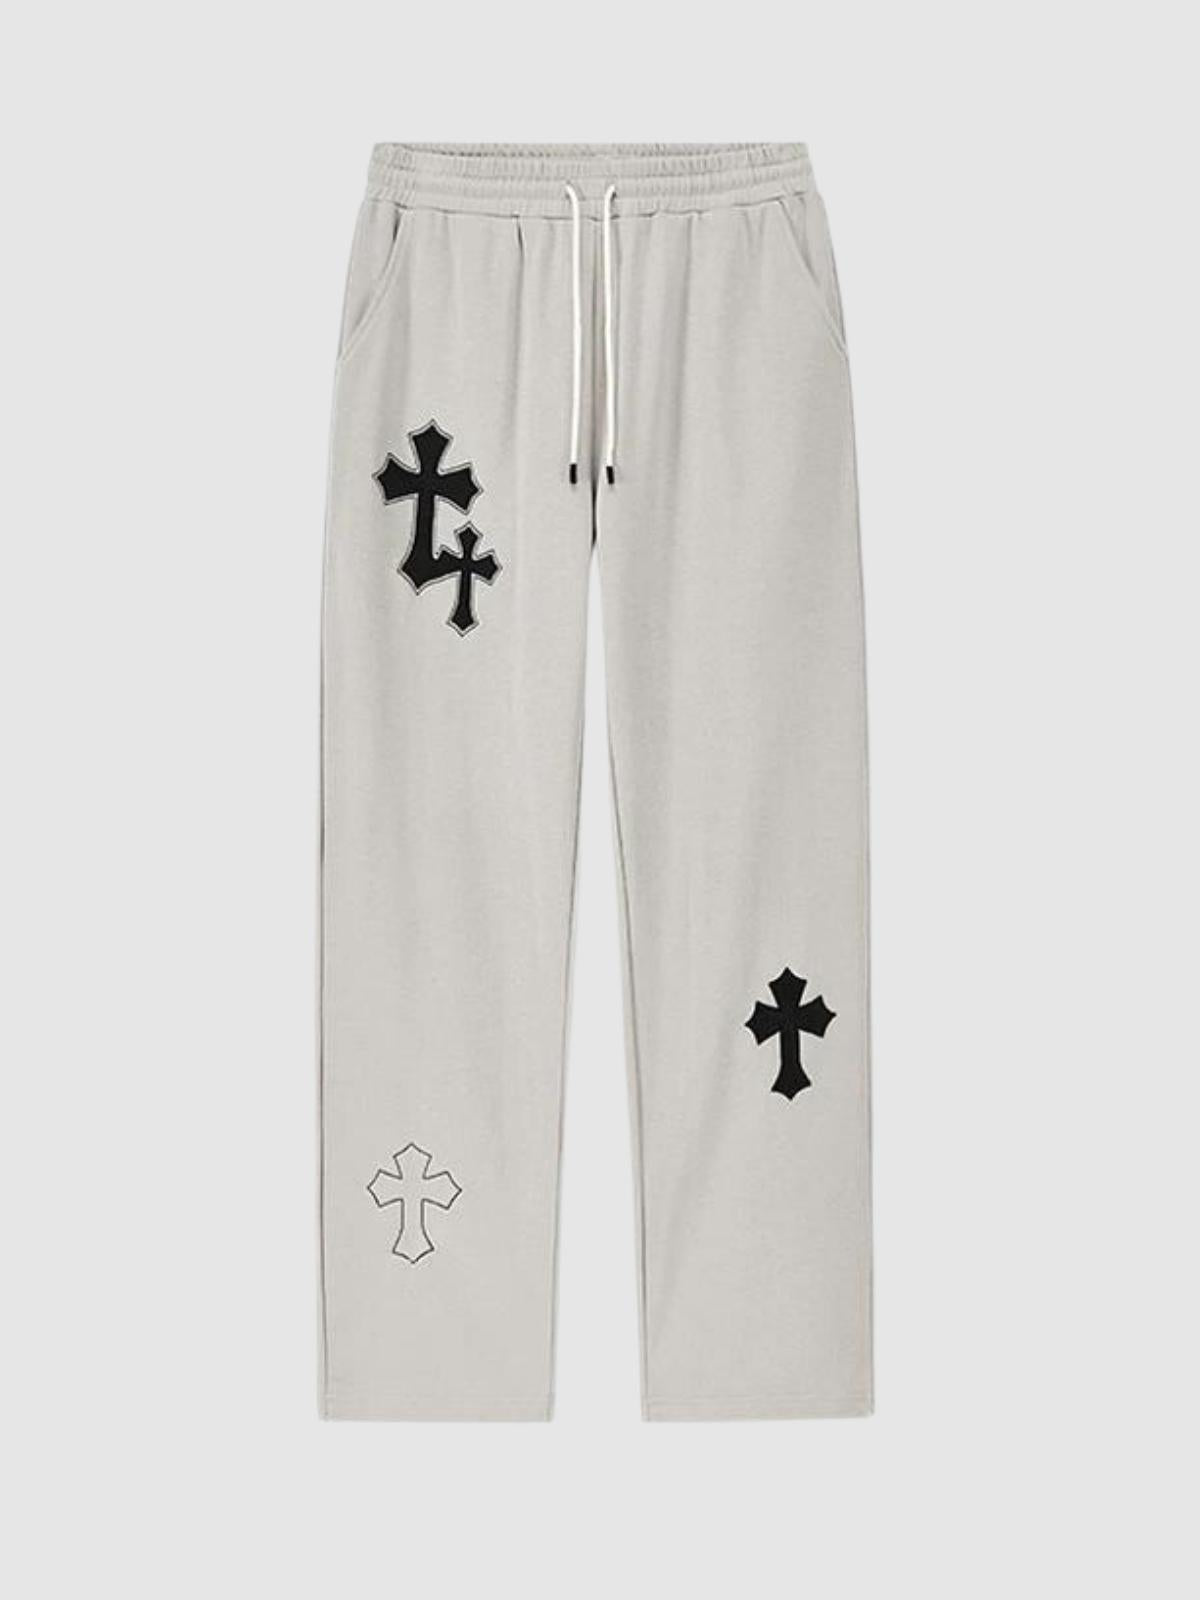 We Love Street Cross Embroidered Casual Pants Loose Sweatpants